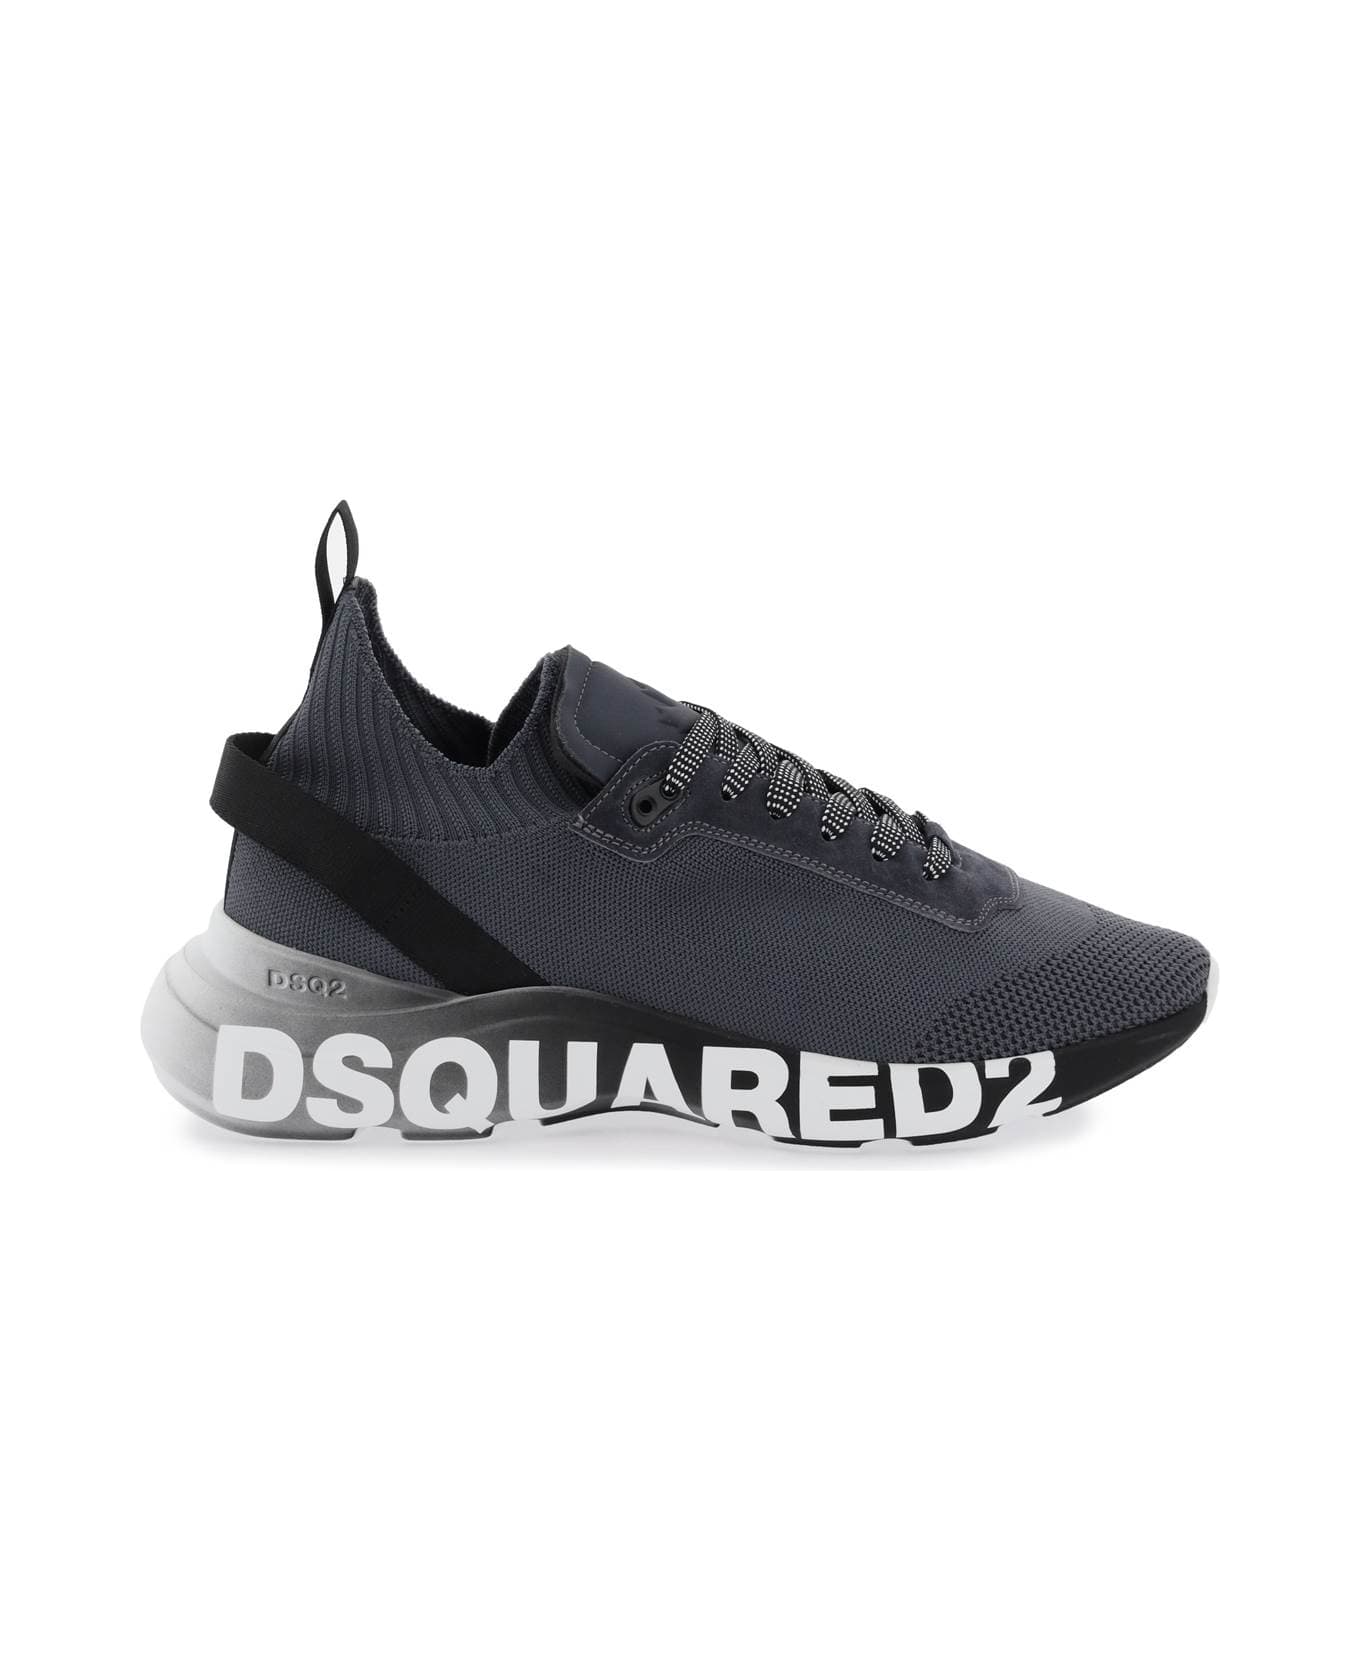 Dsquared2 Fly Sneakers - GREY (Grey)